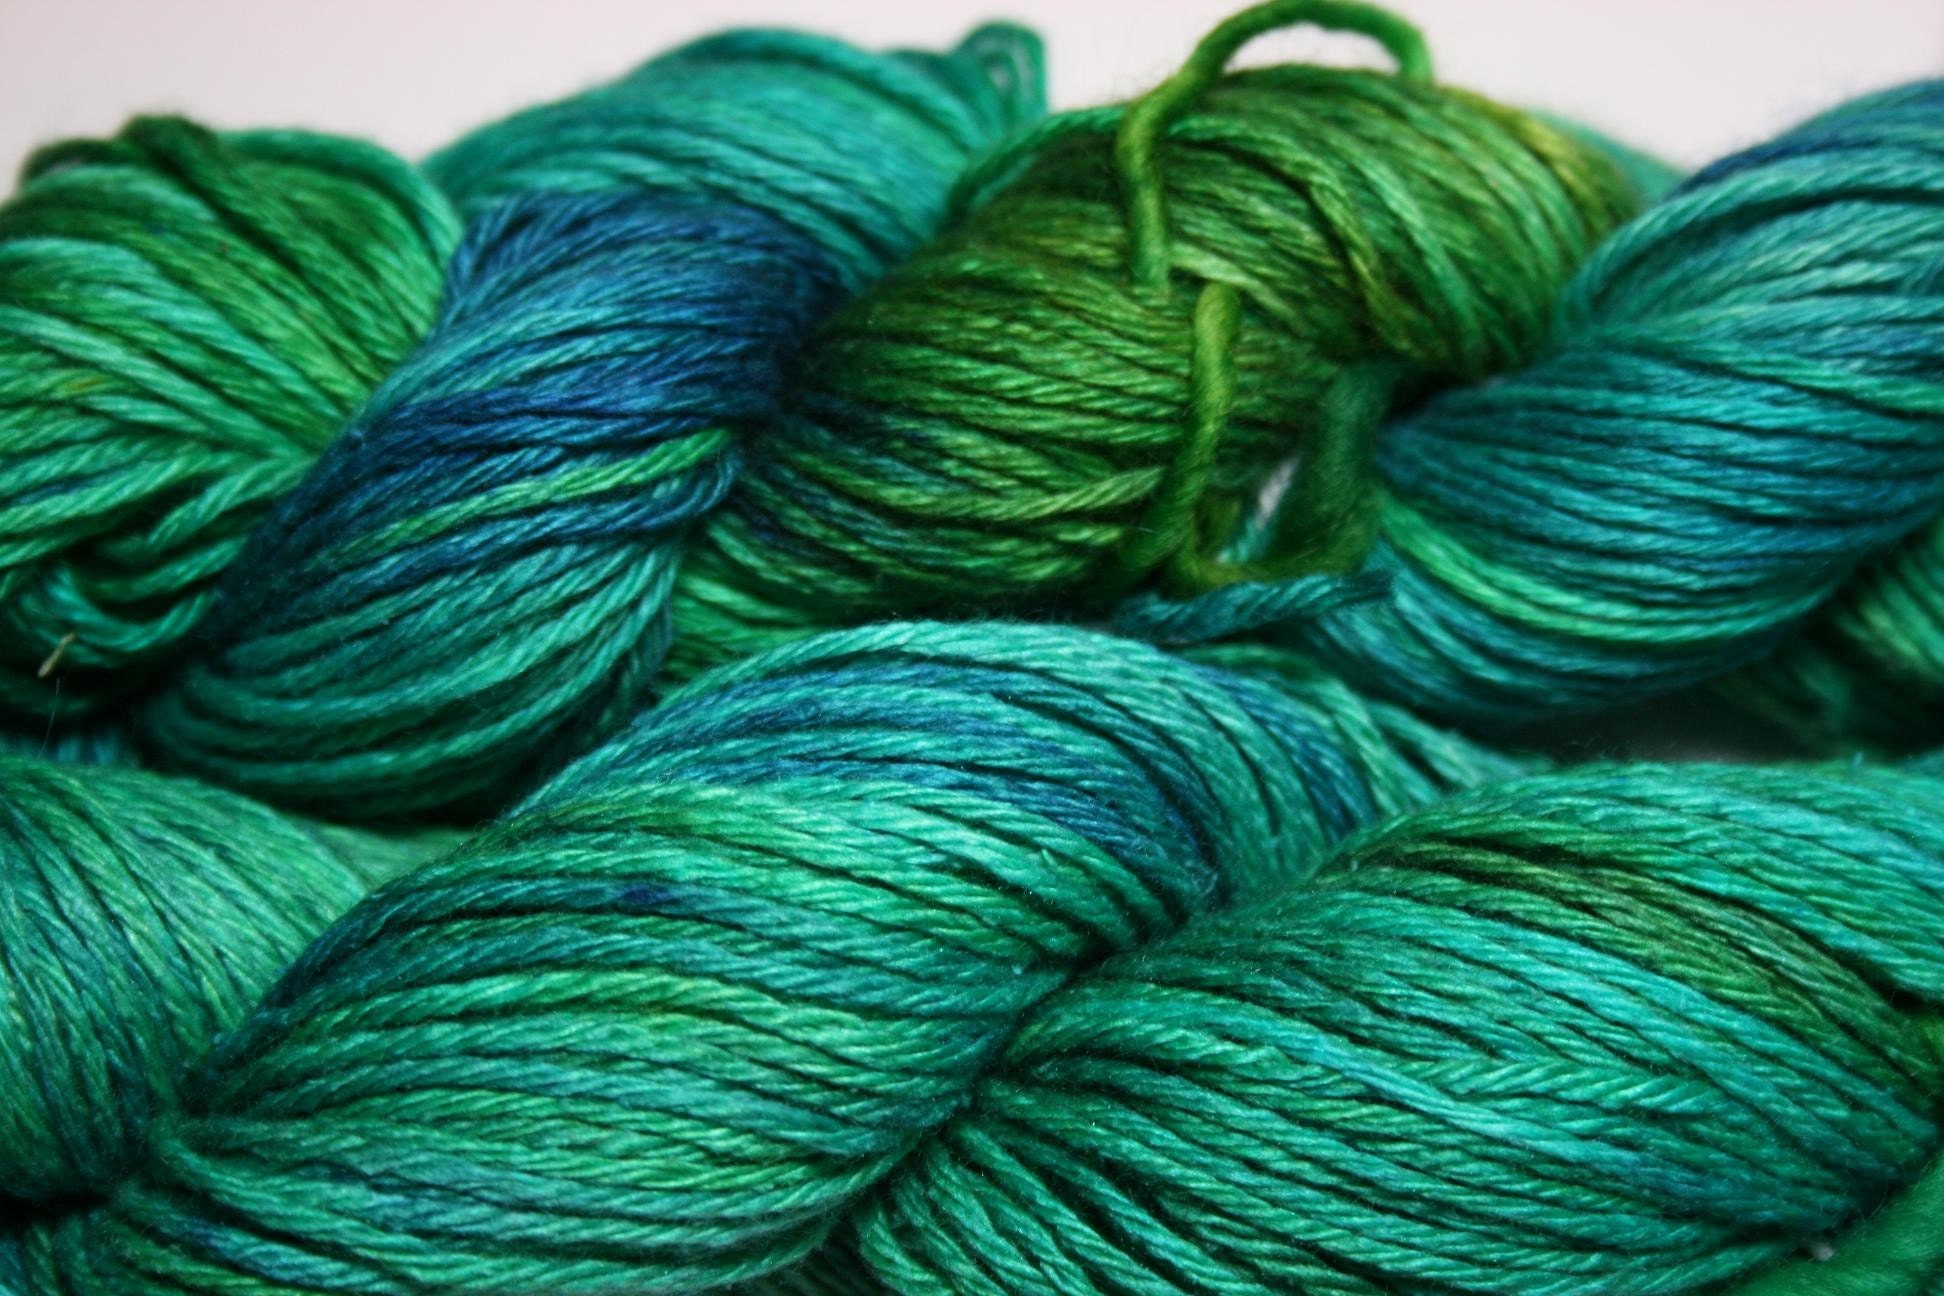 Neptune Gaia DK Yarn hand-painted in blues and greens